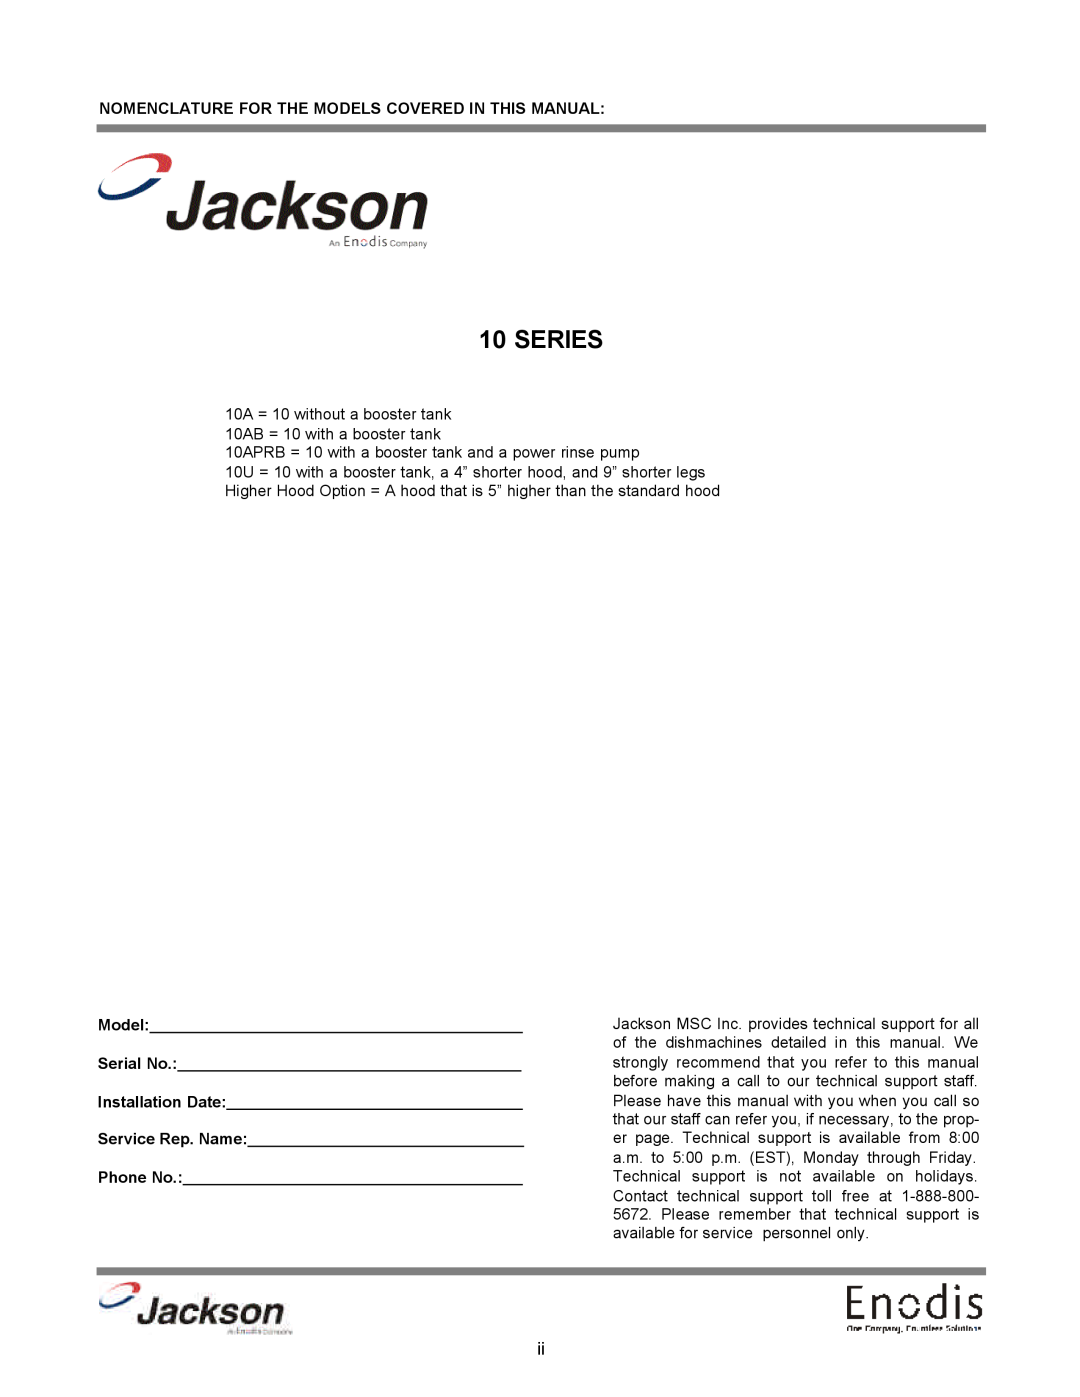 Jackson 10U, dishmachines, 10APRB, 10AB technical manual Nomenclature For The Models Covered In This Manual, Series 